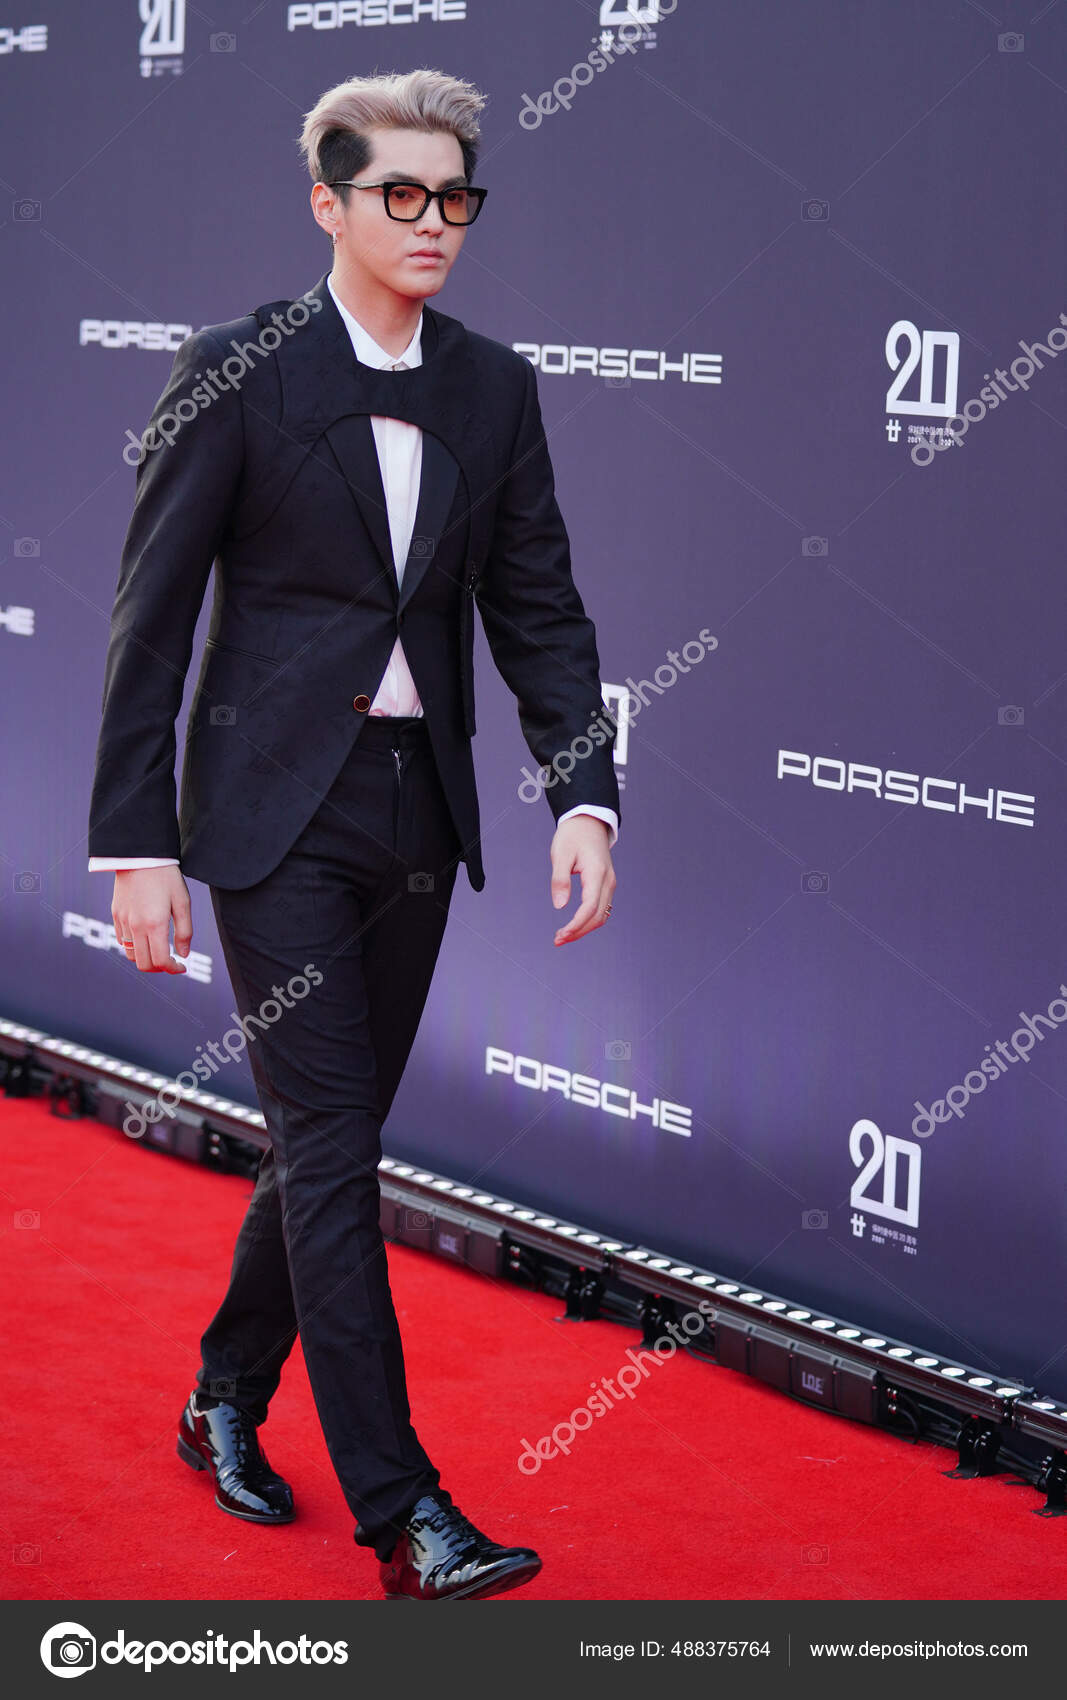 Canadian Actor Rapper Singer Record Producer Model Kris Attends Year –  Stock Editorial Photo © ChinaImages #488375764